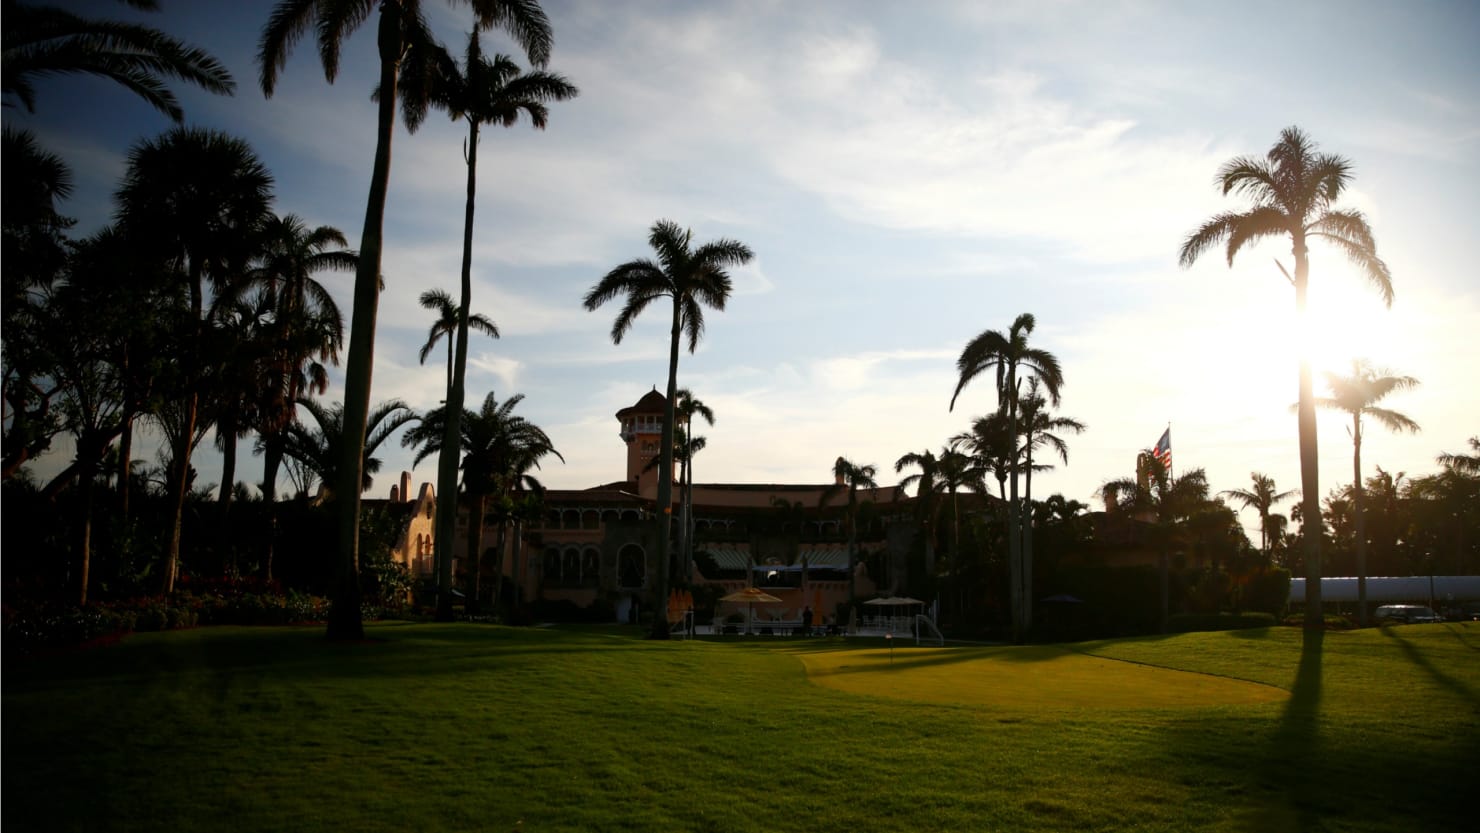 Mar-a-Lago's New Year's Tickets Went Up. Here's the Price